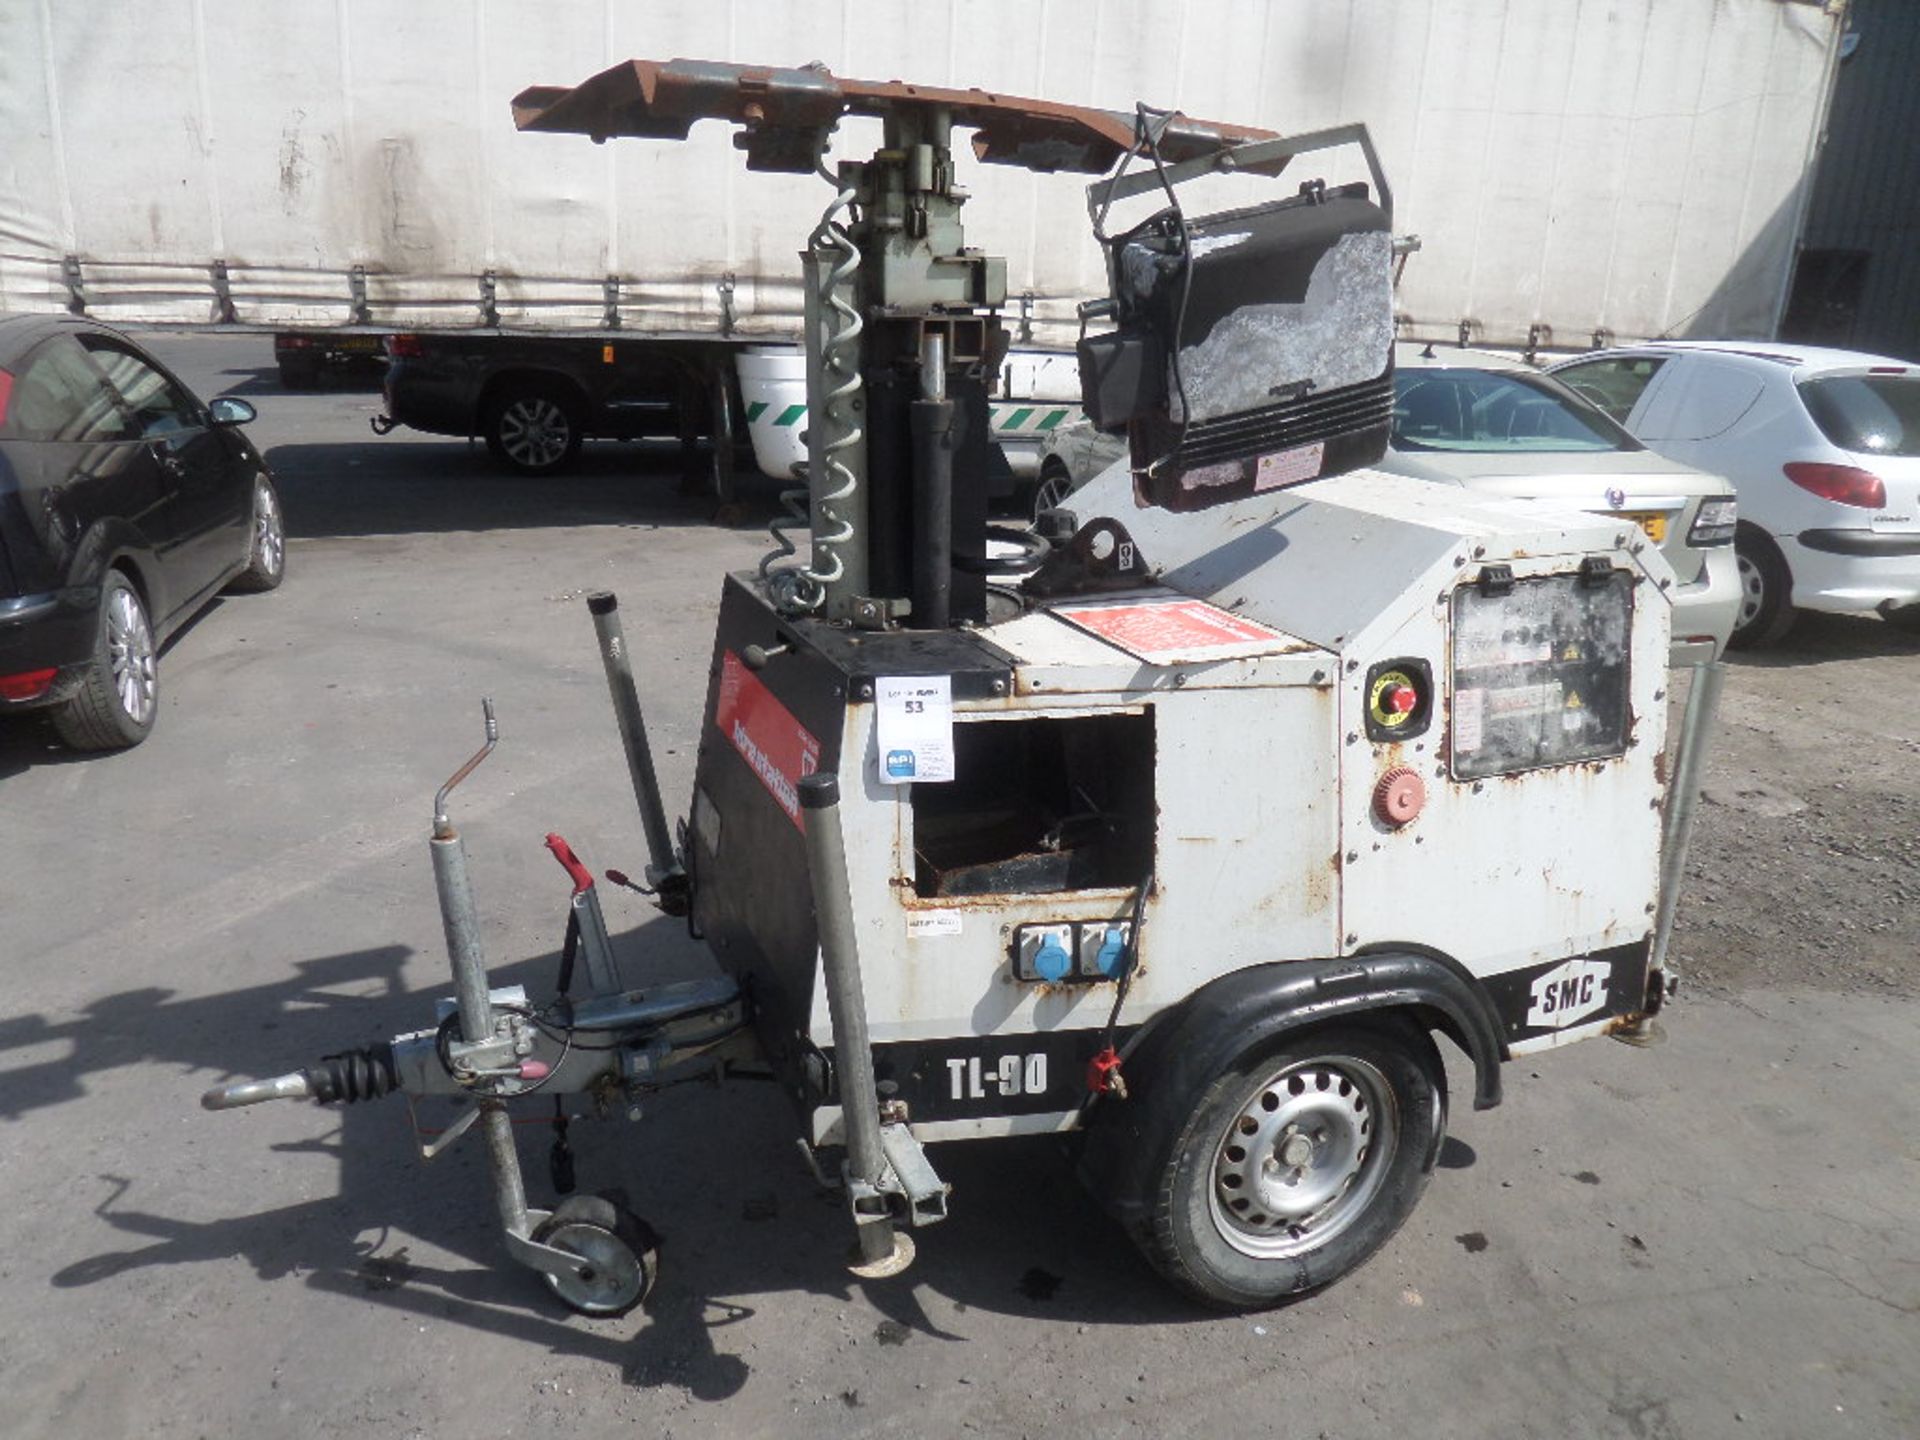 SMC TL-90 {027536} TOWABLE LIGHTING TOWER - DIESEL Trailer eye fitted and has legal tires also rear